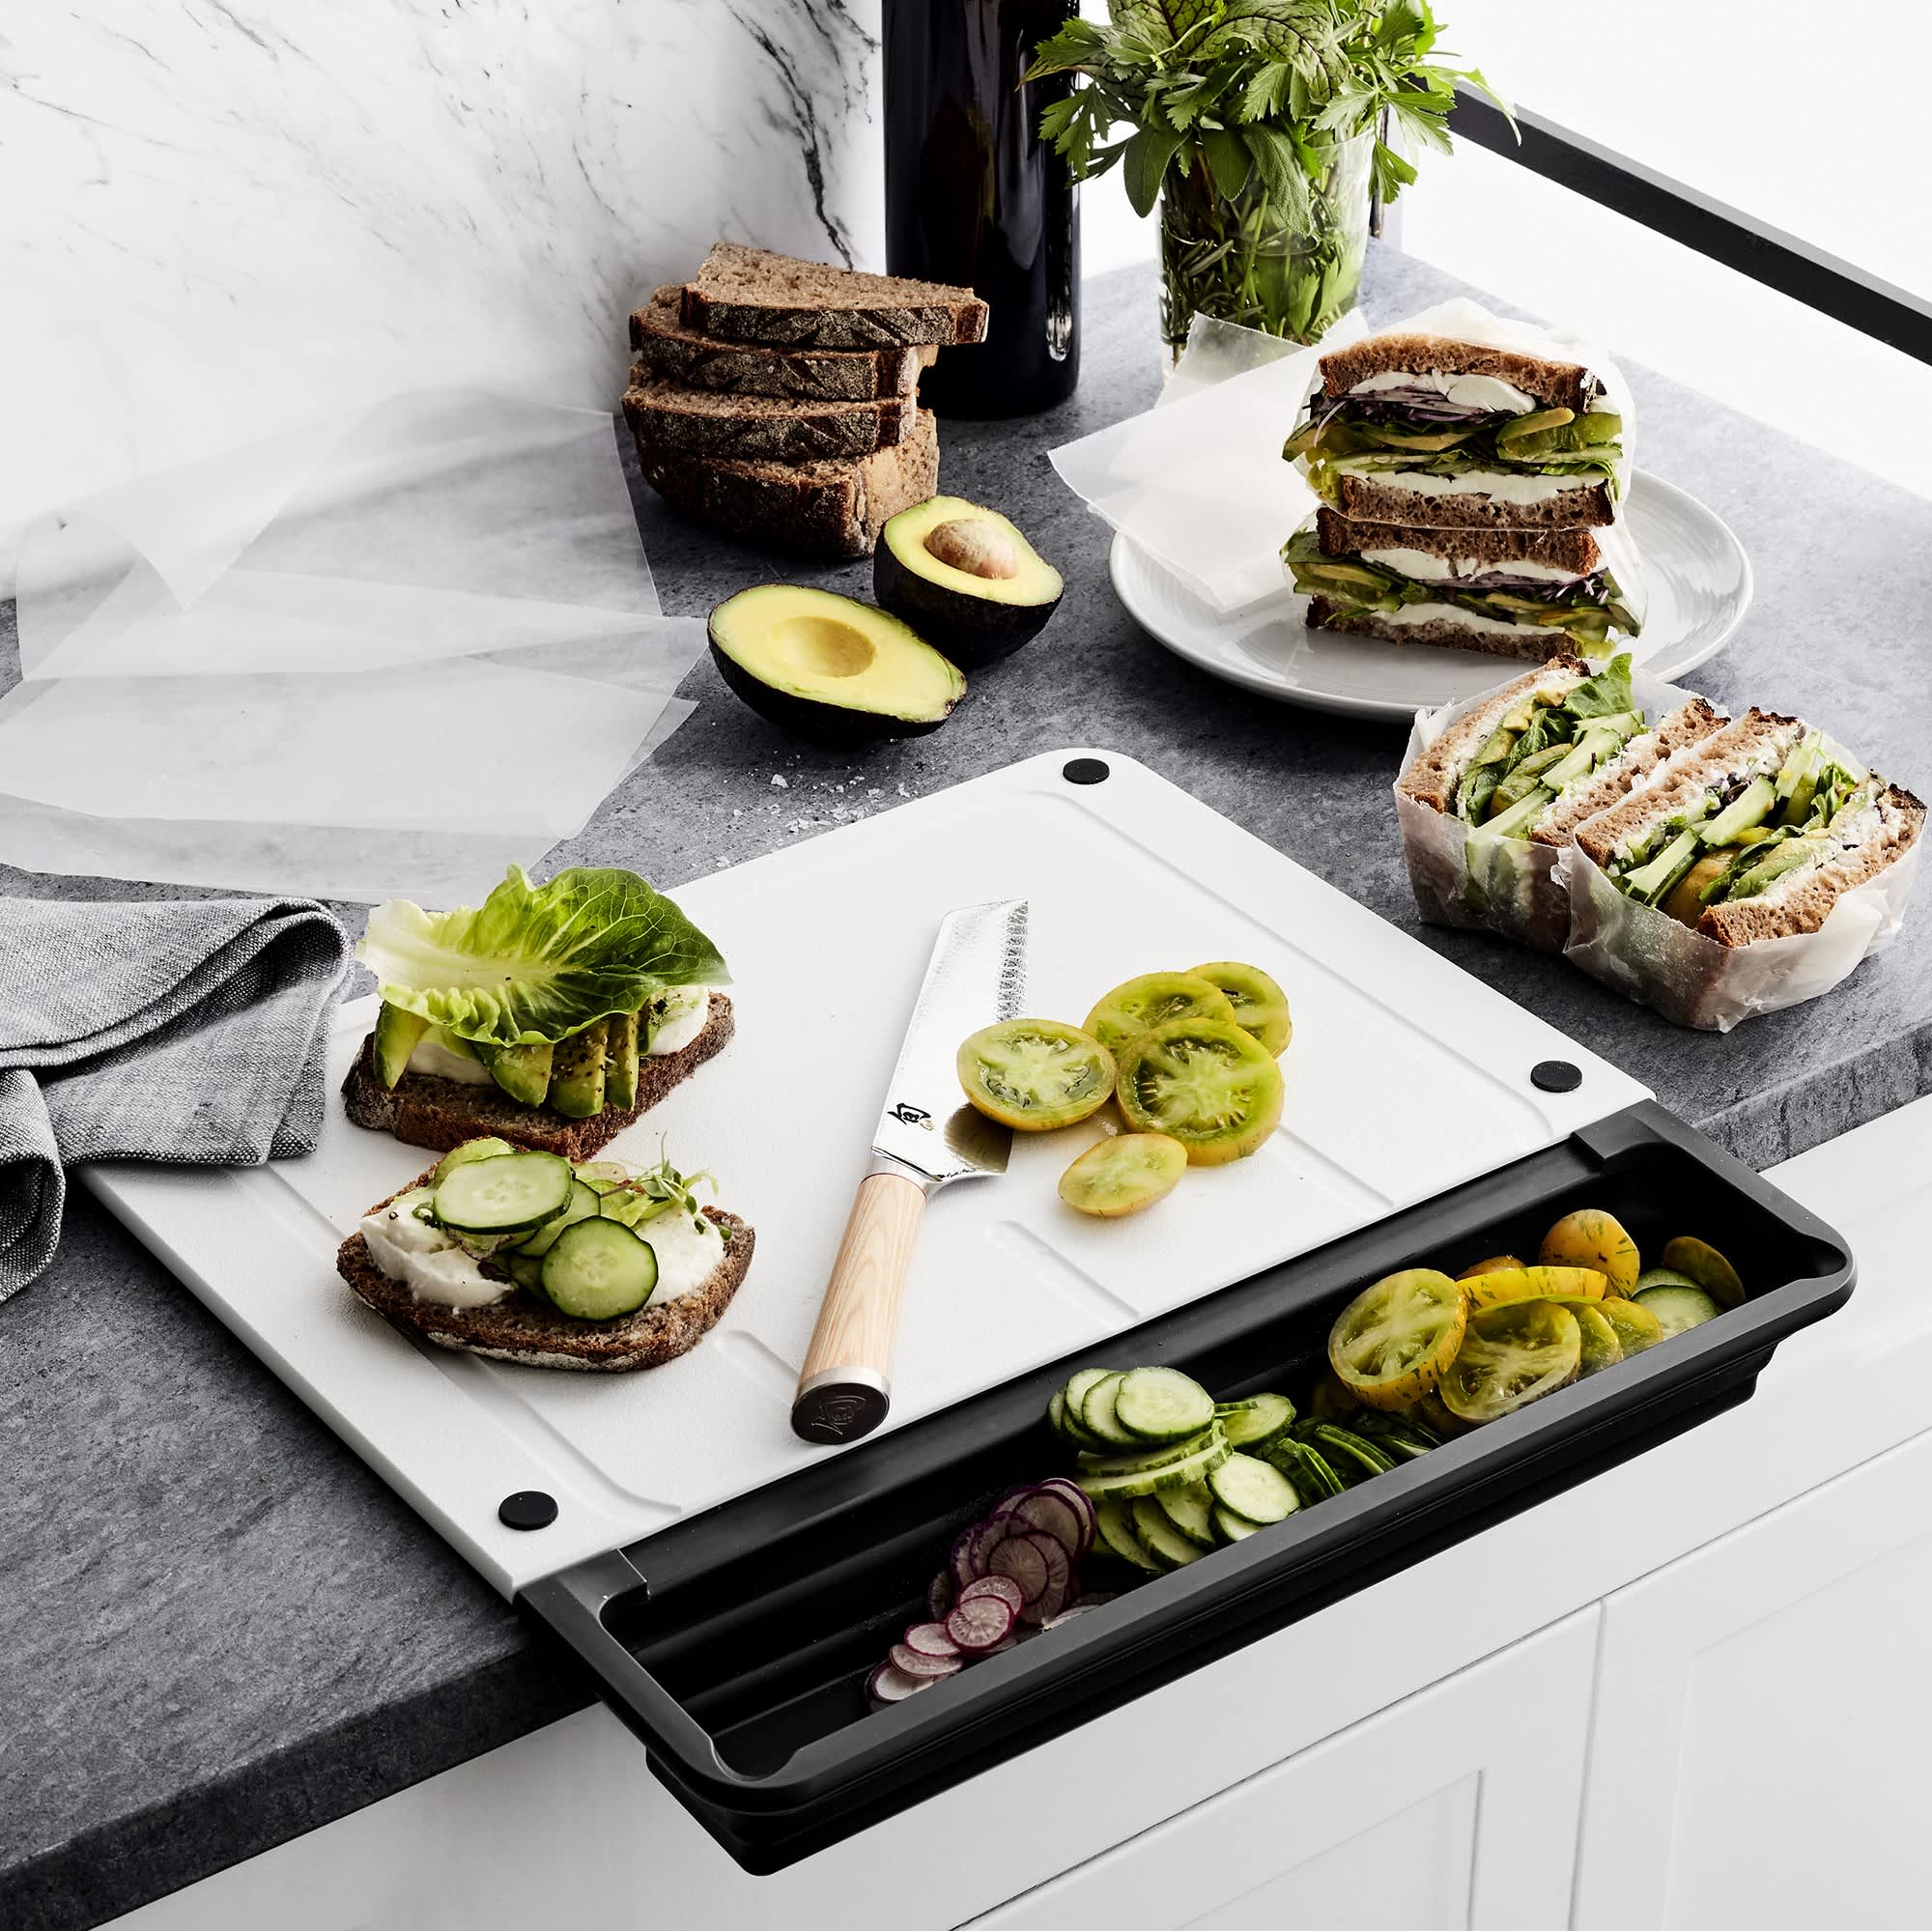 Chop And Pour With This Folding Chopping Board For Mess-Free Cooking